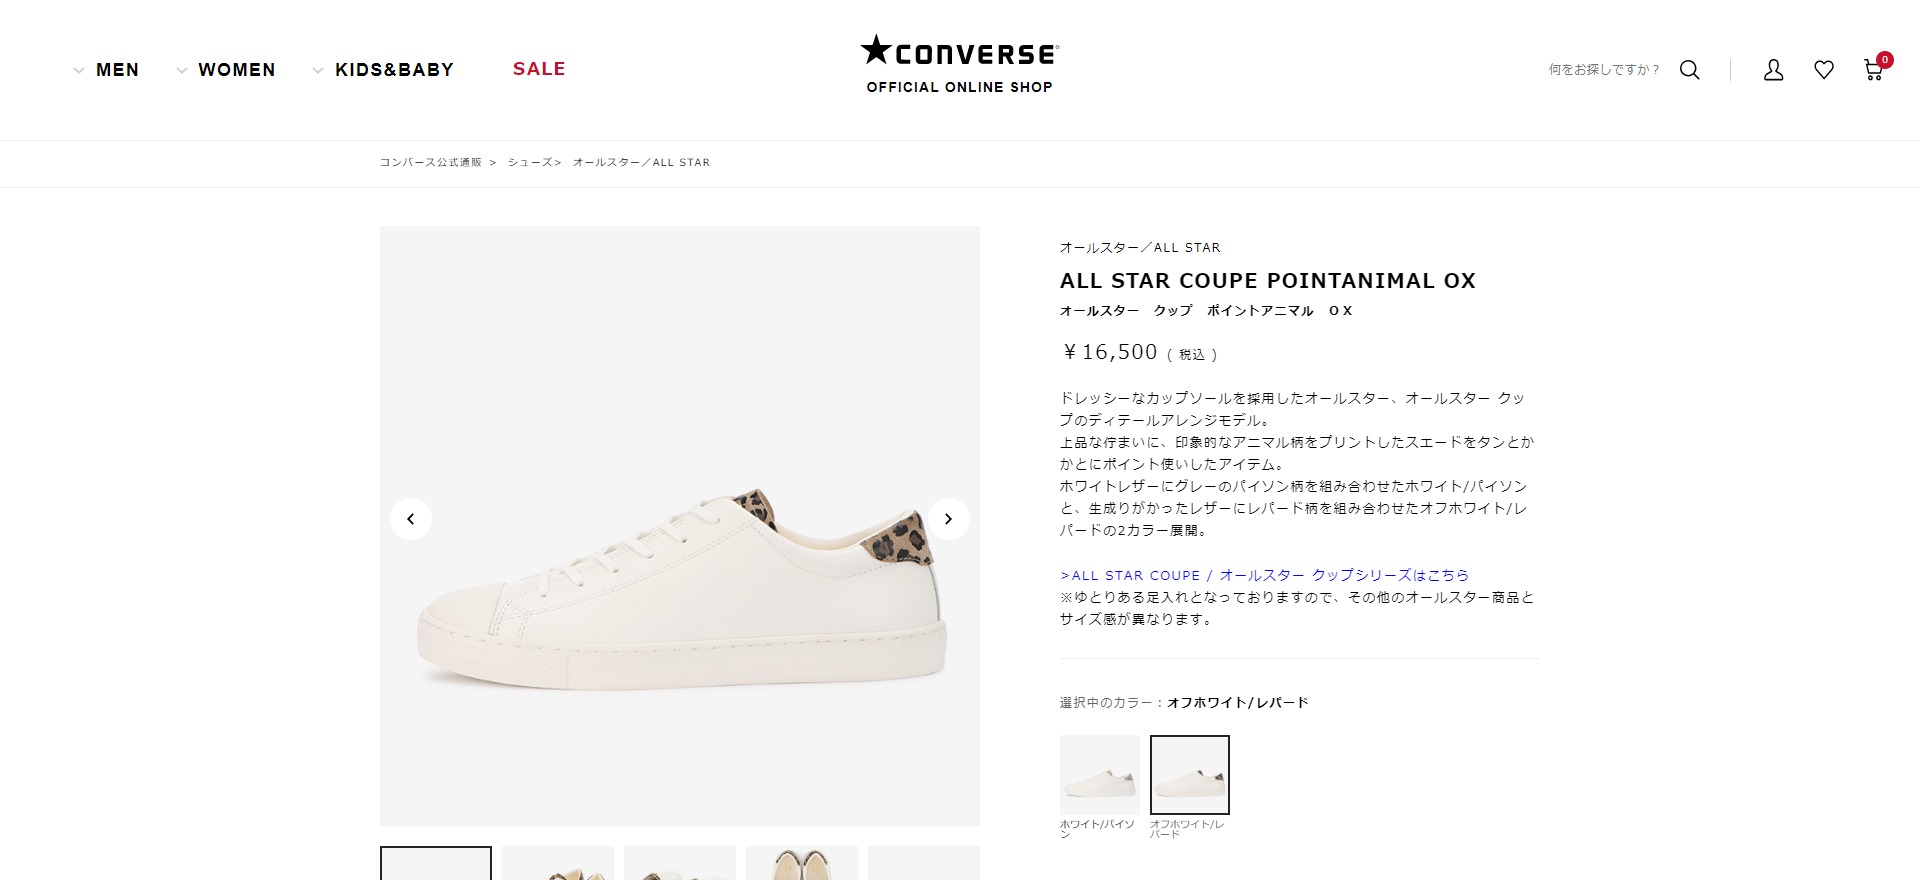 CONVERSE ALL STAR COUPE POINTANIMAL OX コンバース オールスター